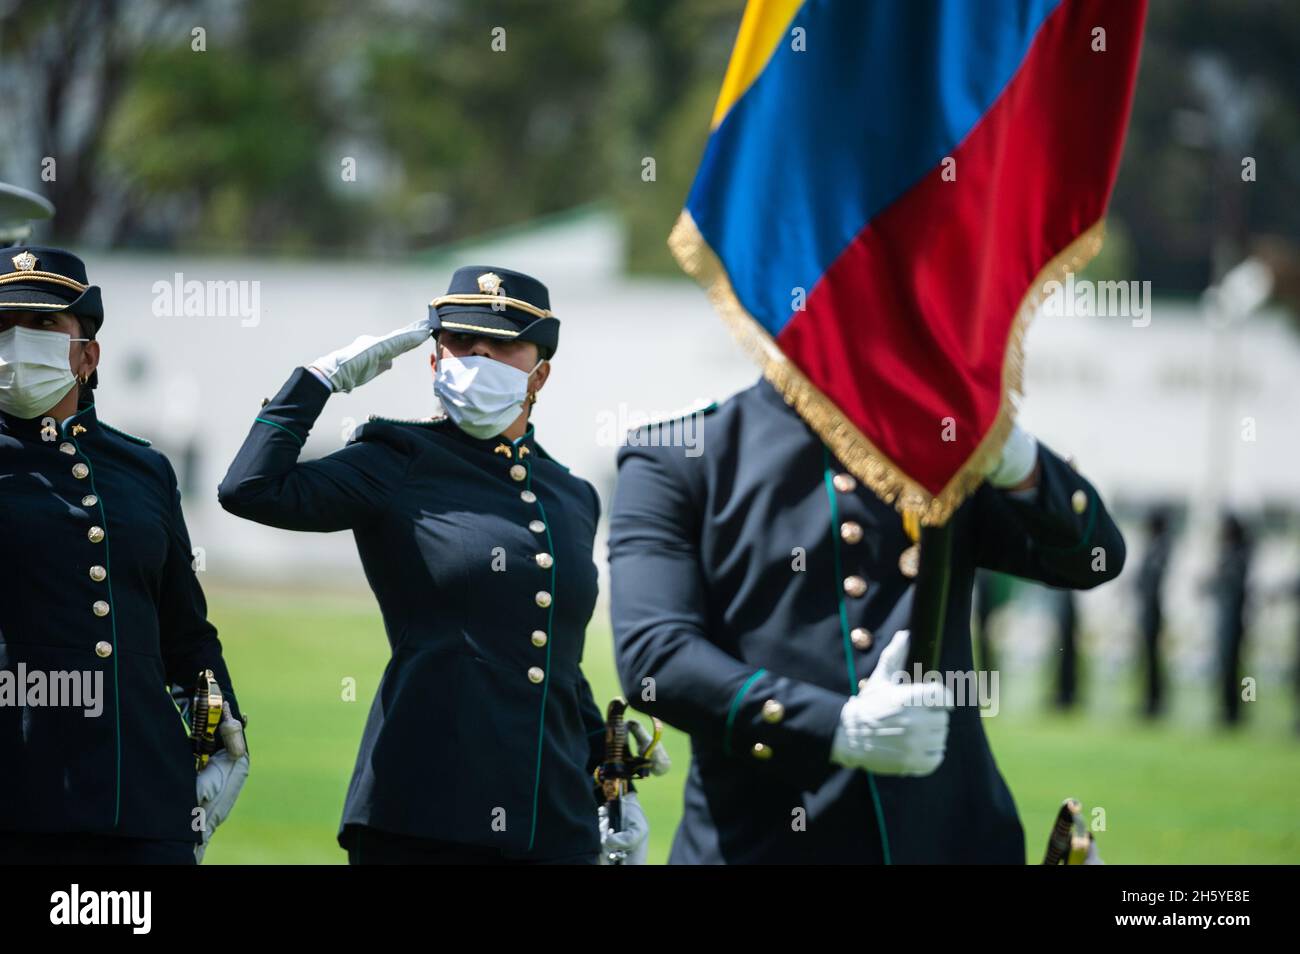 Bogota, Colombia. 11th Nov, 2021. Newly promoted Police officers participate in their promotion ceremony during an event were Colombia's president Ivan Duque Marquez and Colombia's Minister of Defense Diego Molano in conmmemoration of the 130 anniversary of Colombia's National Police and the promotion to officers to more than a 100 police members, in Bogota, Colombia on November 11, 2021. Credit: Long Visual Press/Alamy Live News Stock Photo